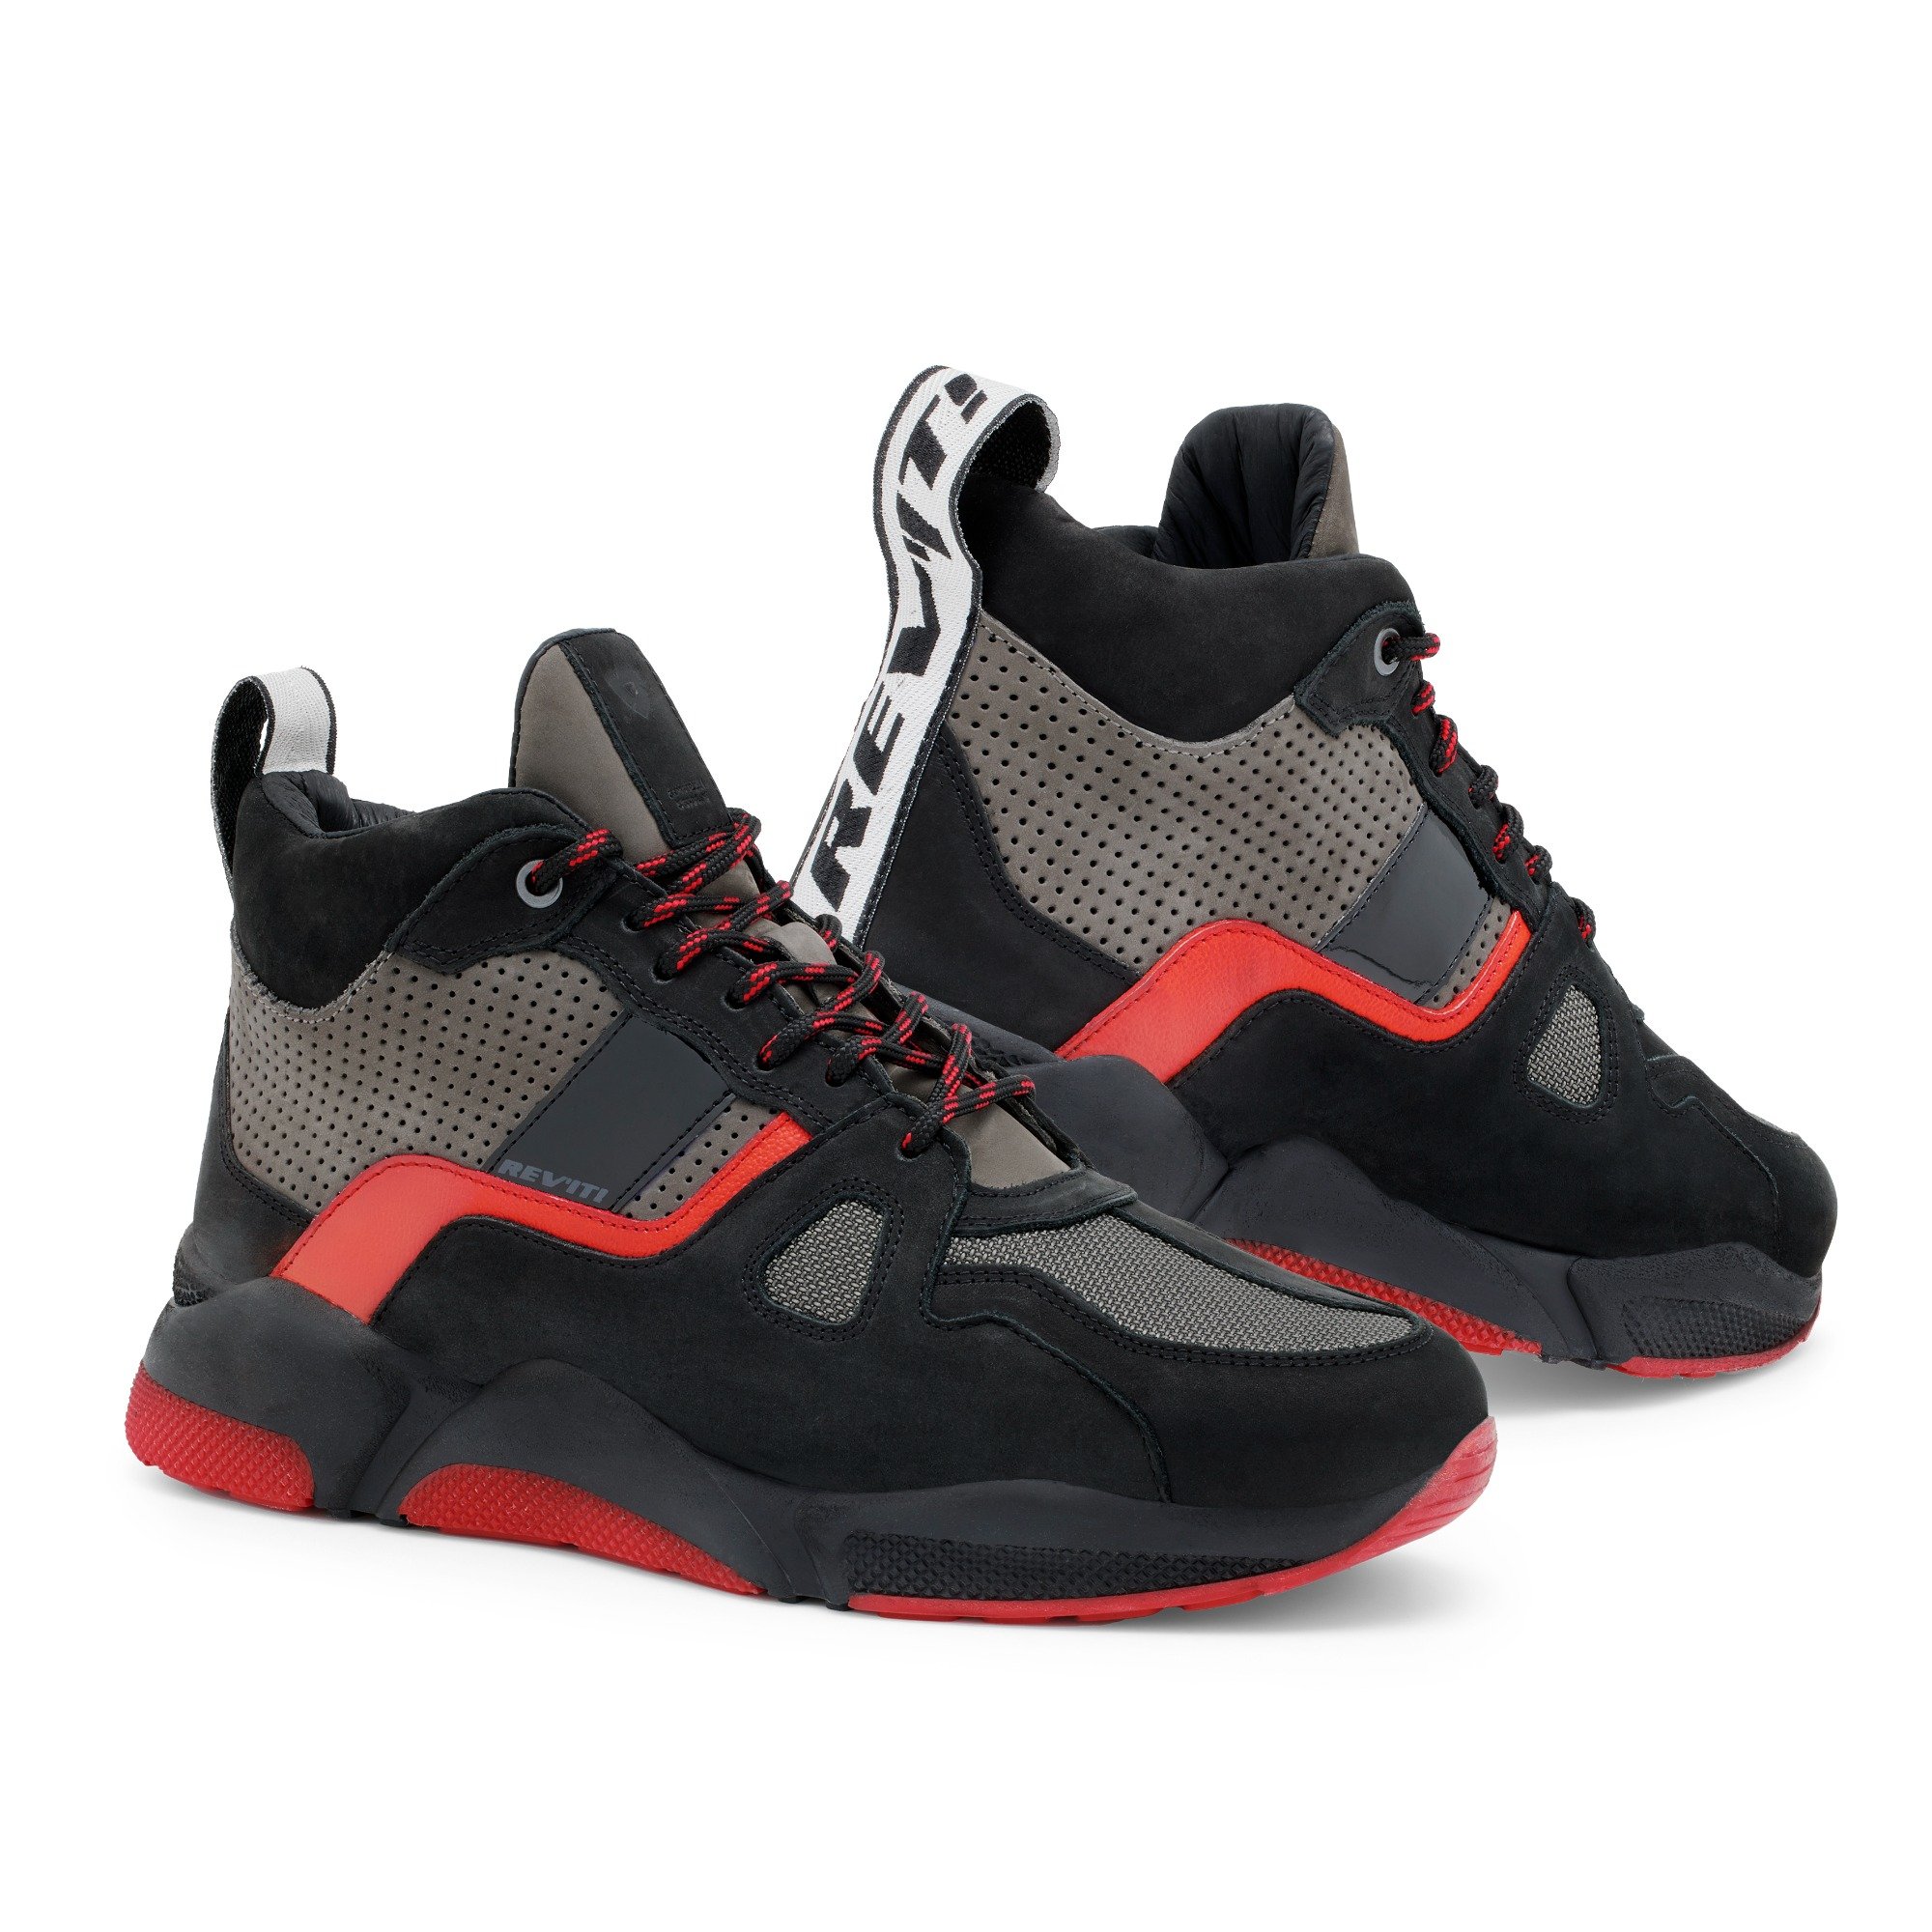 Image of EU REV'IT! Astro Noir Rouge Chaussures Taille 41